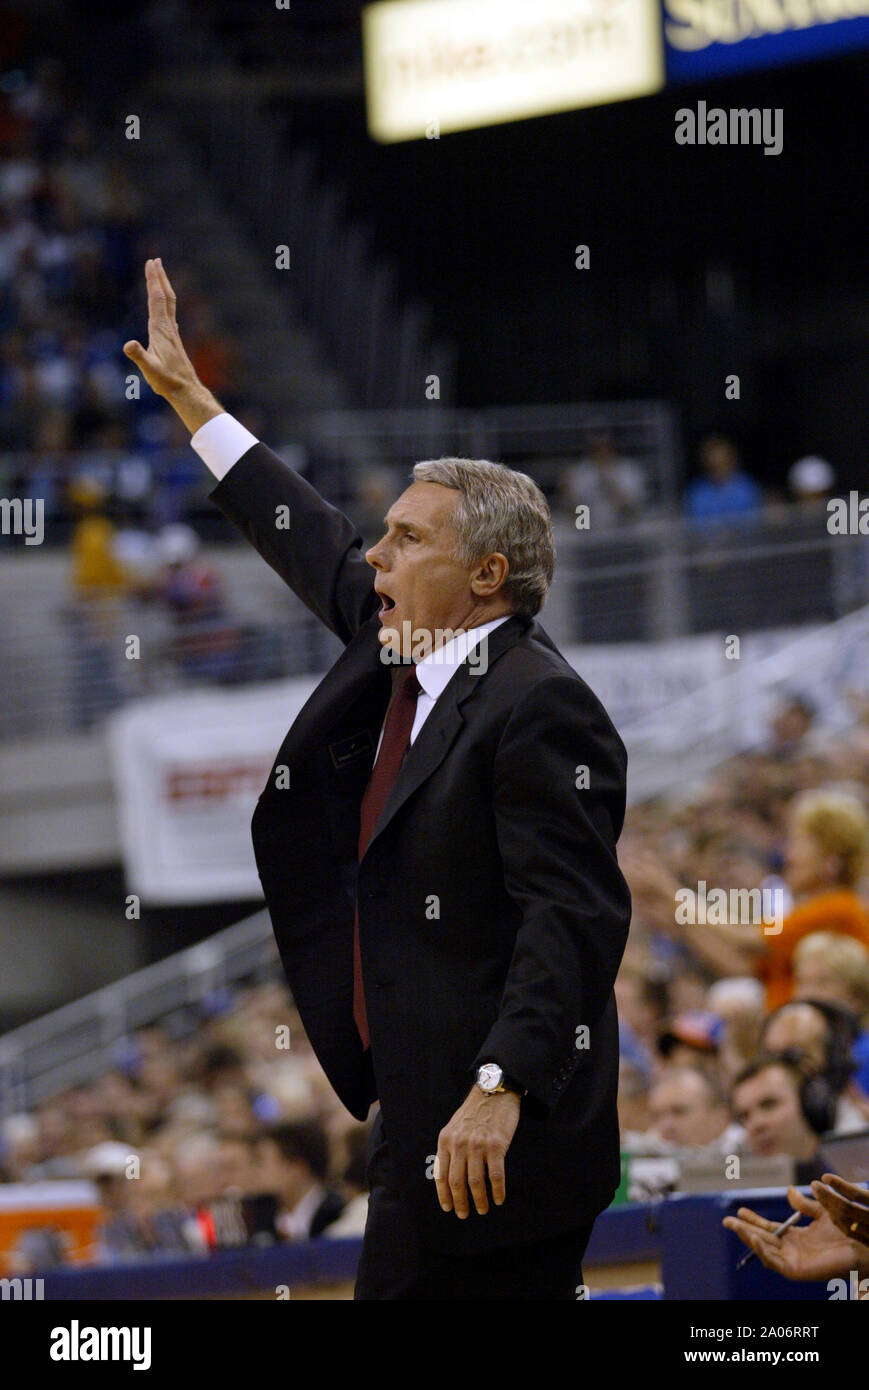 Maryland coach Gary Williams watches his team during the Terrapin's 69-68 overtime upset of the #1 ranked Gators Wednesday, December 10, 2003, at the Stephen C. O'Connell center in Gainesville, Florida. The win marked Williams' 300th career coaching victory. Stock Photo